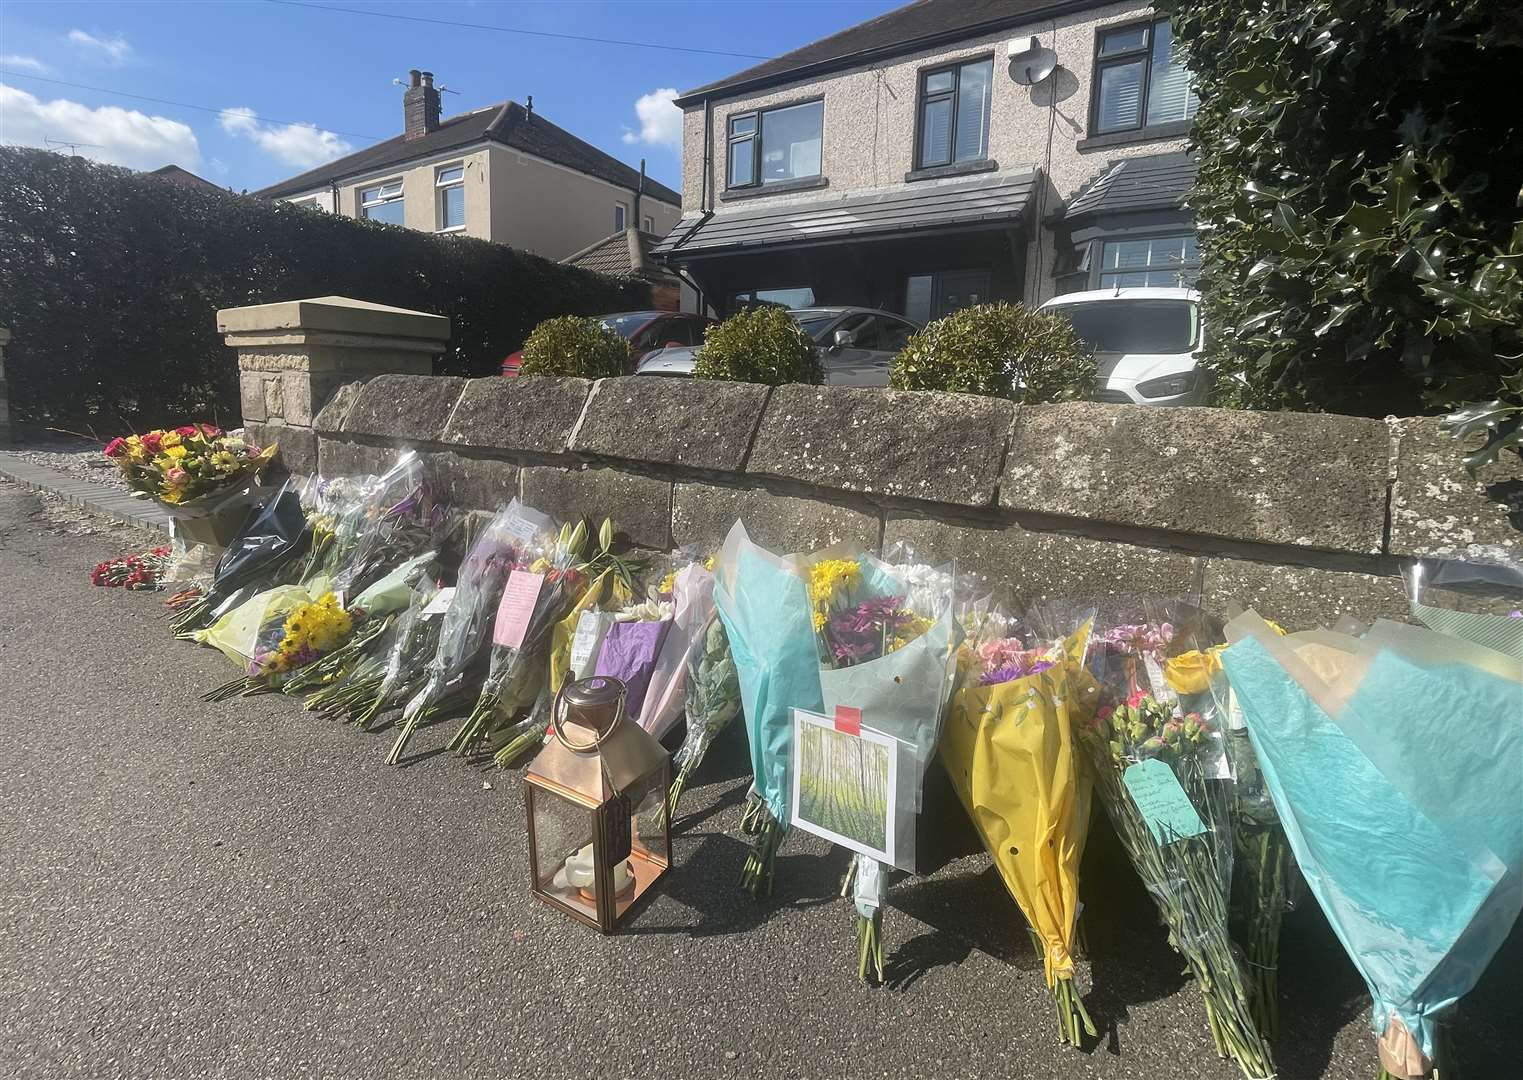 Floral tributes were left outside a house in Greenhill, Sheffield (Dave Higgens/PA)